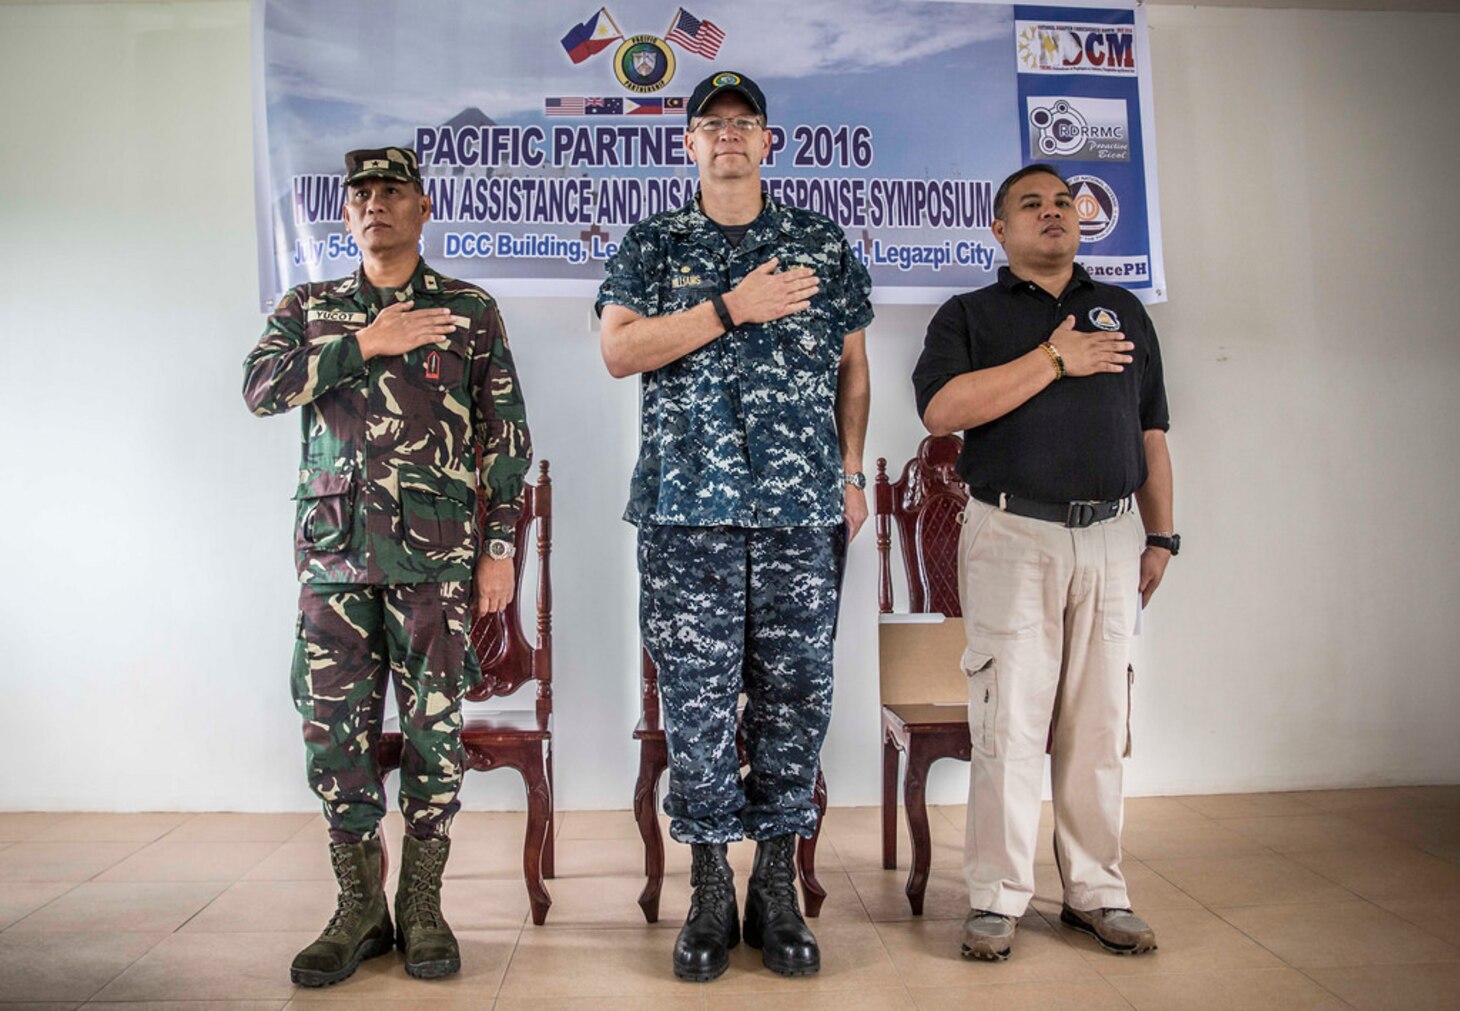 Philippine Air Force Brig. Gen. Claudio L. Yucot (left), U.S. Navy Capt. Tom Williams, mission commander, Pacific Partnership 2016 (center), and Director Bernardo R. Alejandro IV, regional director, Office of Civil Defense 5, render honors during the Philippine national anthem at the start of a Humanitarian Assistance Disaster Relief workshop in support of Pacific Partnership 2016. During the three-day workshop, co-hosted by the Armed Forces of the Philippines and Pacific Partnership 2016, Filipino civilians and military service members coordinated a tabletop exercise to simulate multilateral disaster response among partners during a crisis. Pacific Partnership is visiting the Philippines for the seventh time since its first visit in 2006. Partner nations are working side-by-side with local military and non-government organizations to conduct cooperative health engagements, community relation events and subject matter expert exchanges to better prepare for a natural disaster or crisis. 